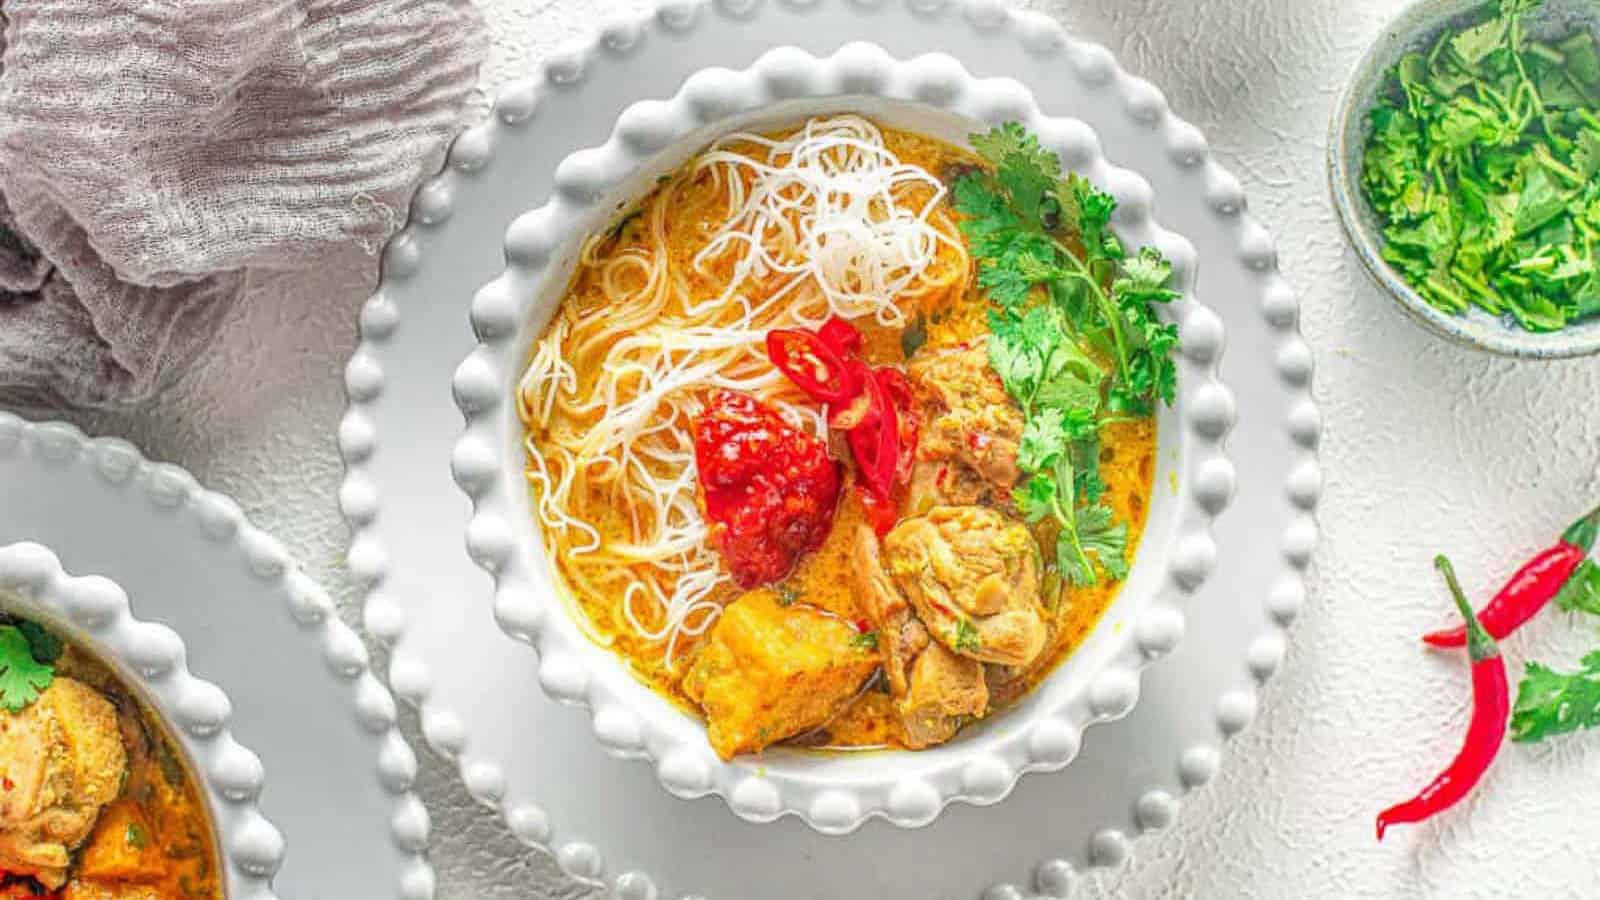 <p>There’s something so comforting about Chicken Curry Laksa. This hot and spicy Malaysian noodle soup pairs creamy, coconut curry broth with tender chicken. It's the perfect blend of flavors – spicy, savory, and slightly sweet. Consider this your warning – it’s seriously addictive!<br><strong>Get the Recipe: </strong><a href="https://allwaysdelicious.com/curry-laksa/?utm_source=msn&utm_medium=page&utm_campaign=msn">Chicken Curry Laksa</a></p>